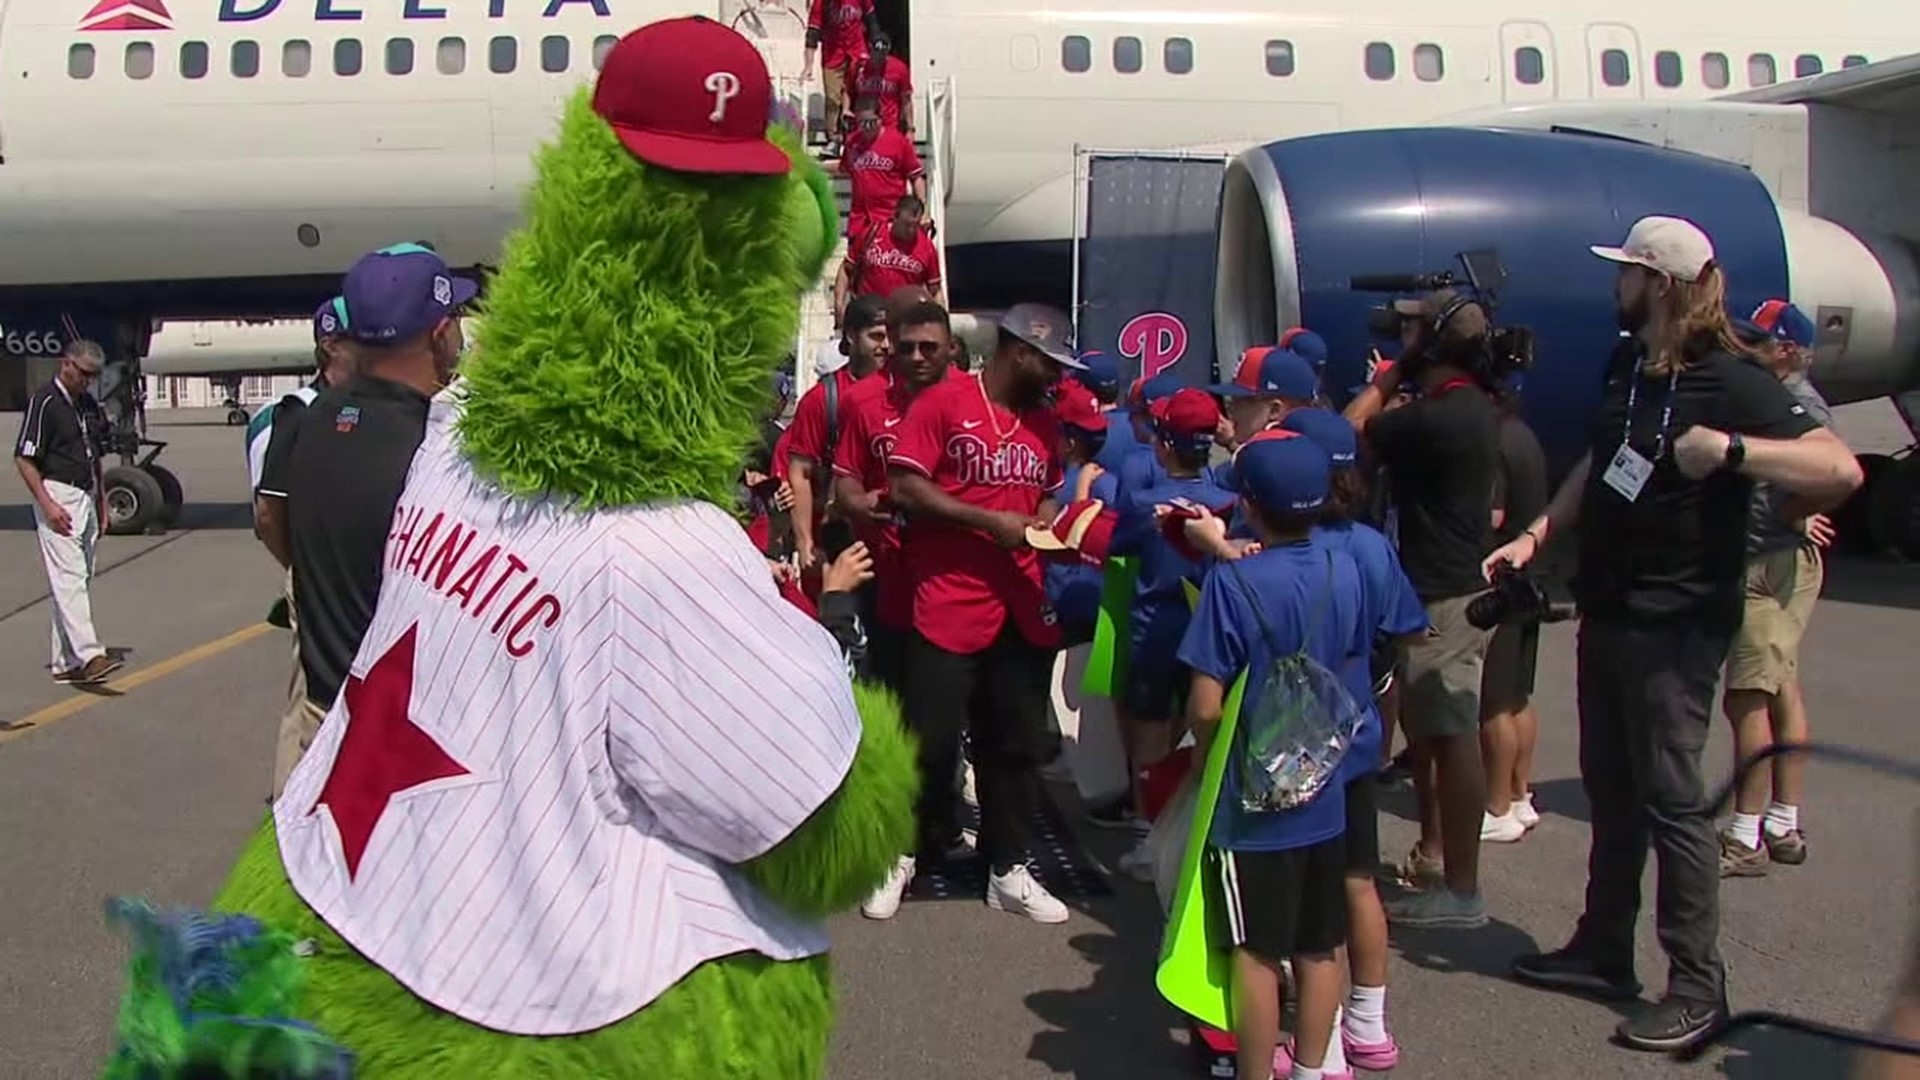 Nationals and Phillies are kids for a day, mingling among Little